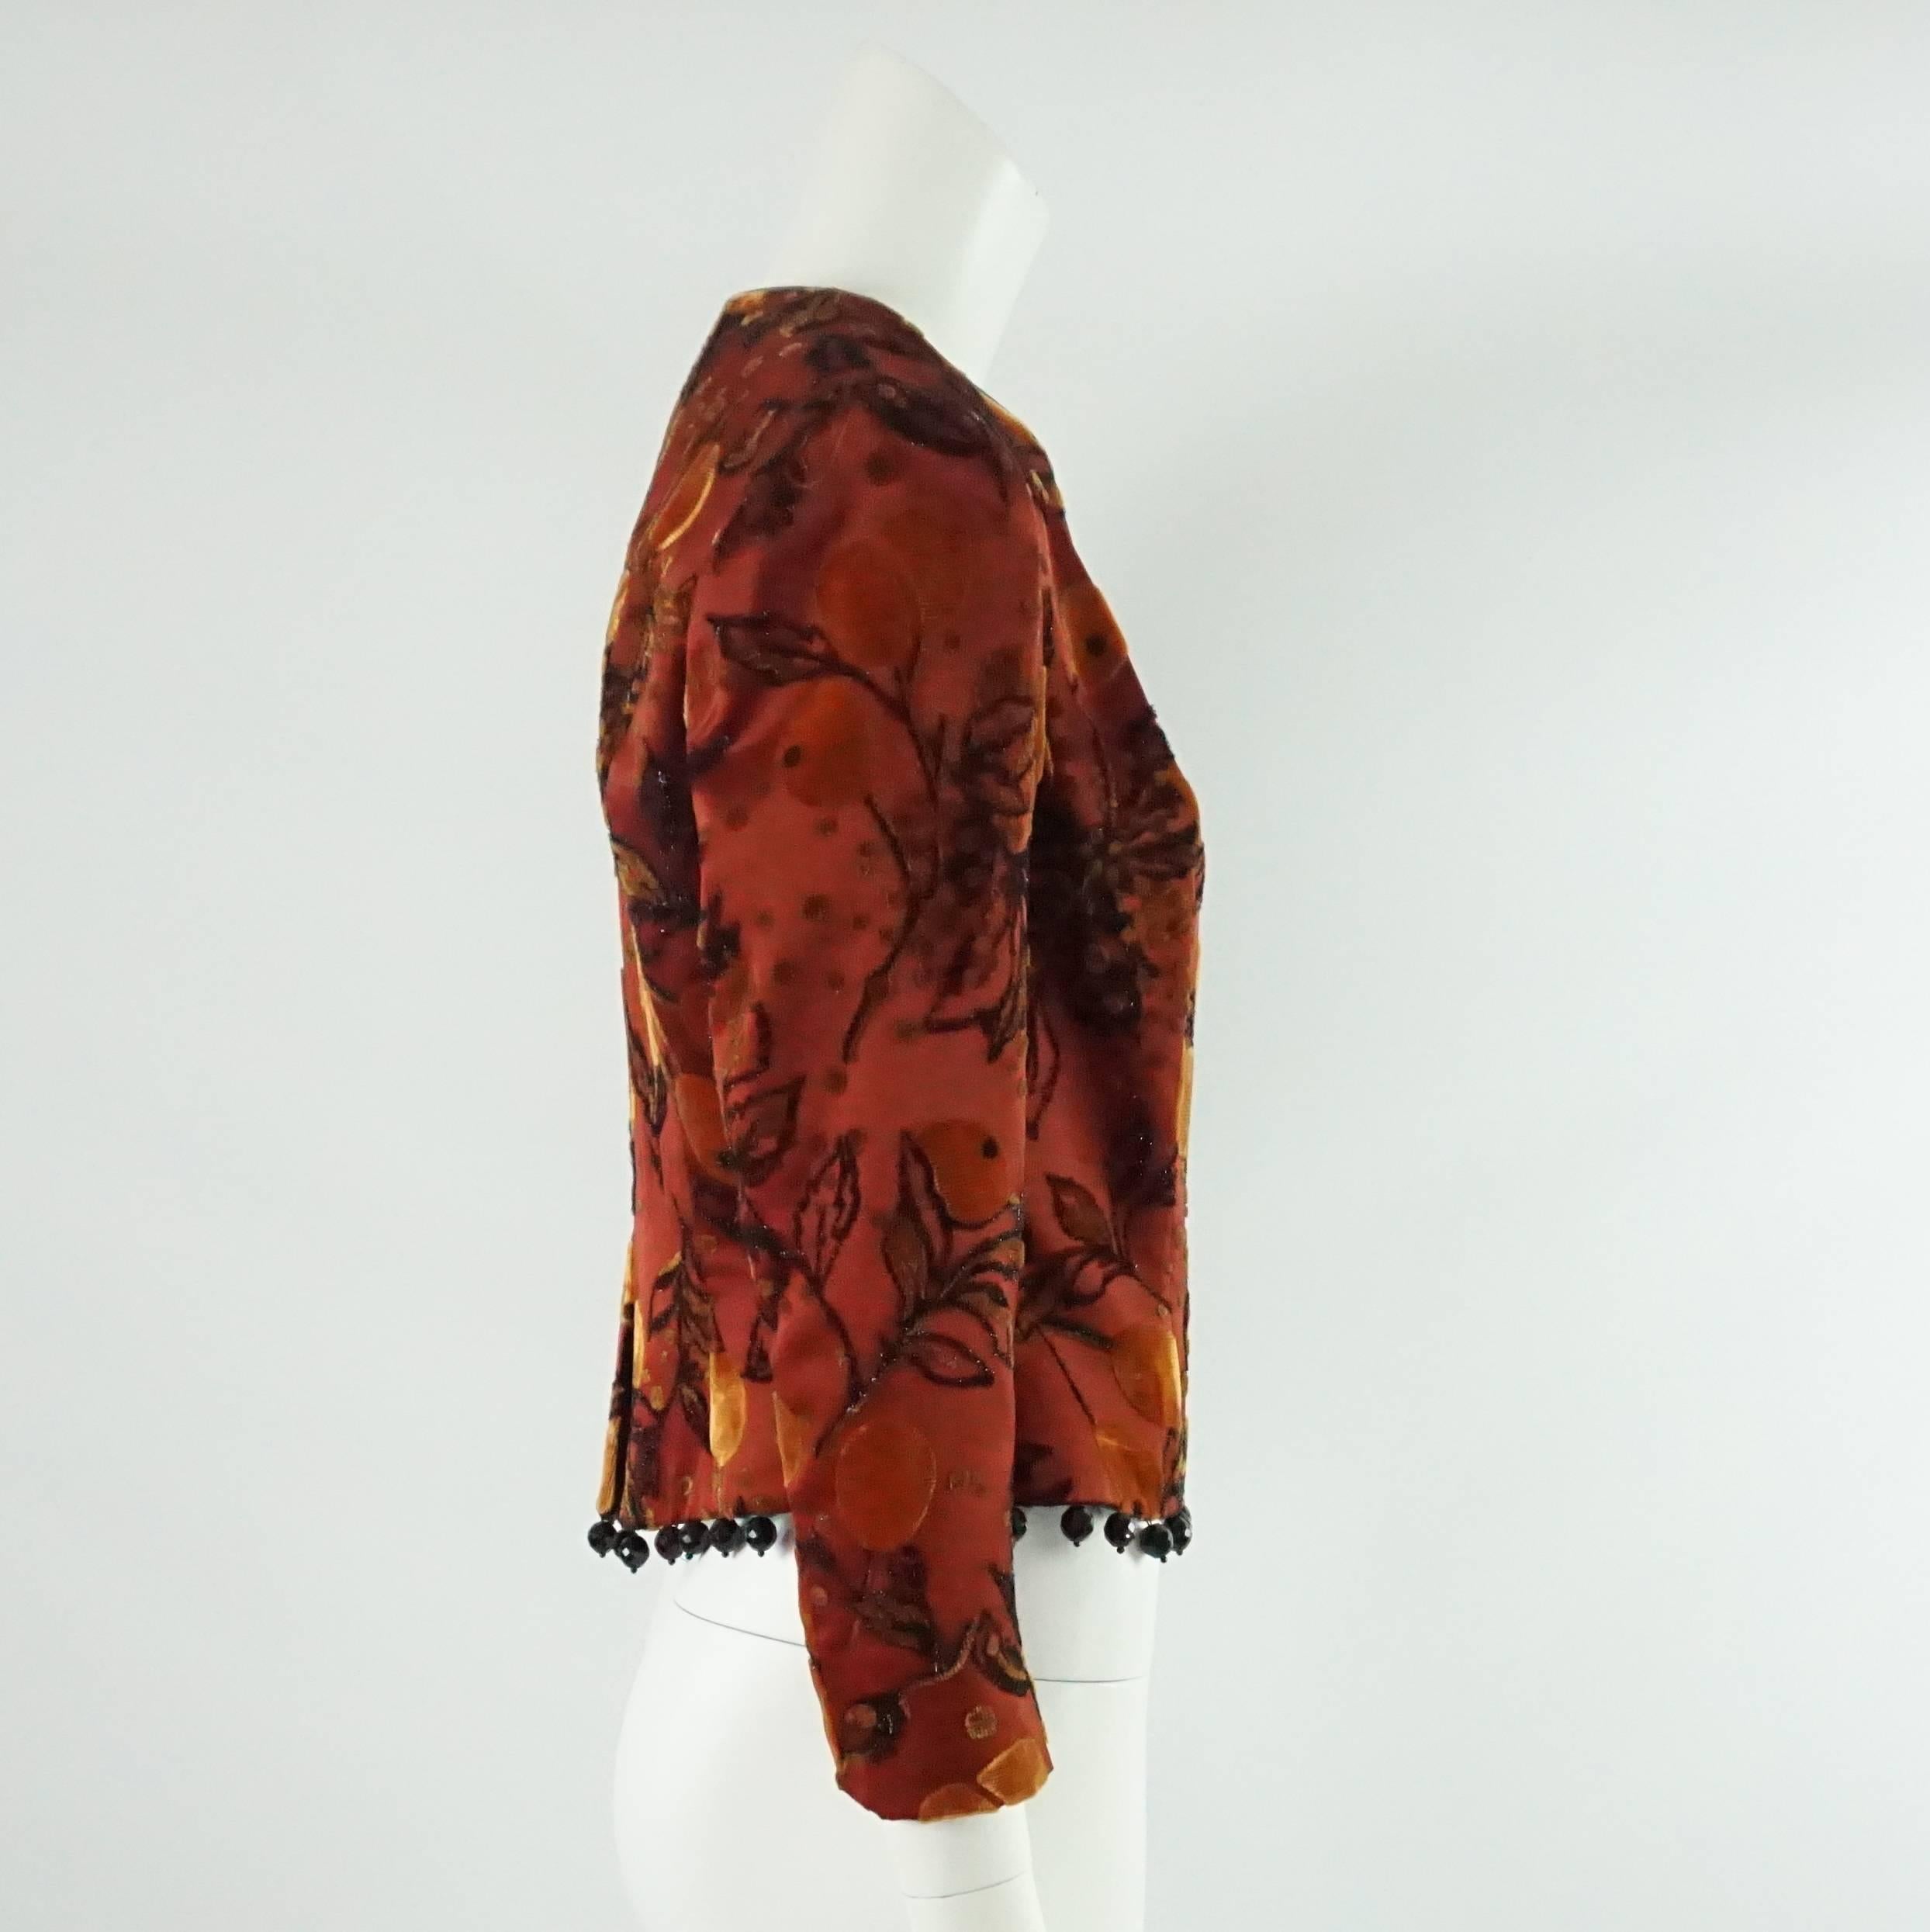 This Joanna Mastroianni jacket is red cut velvet with black hanging beads. It has orange, dark beige, and shimmery black on it. This jacket is in excellent condition.

Measurements
Shoulder to Shoulder: 15"
Sleeve Length: 21.25"
Bust: